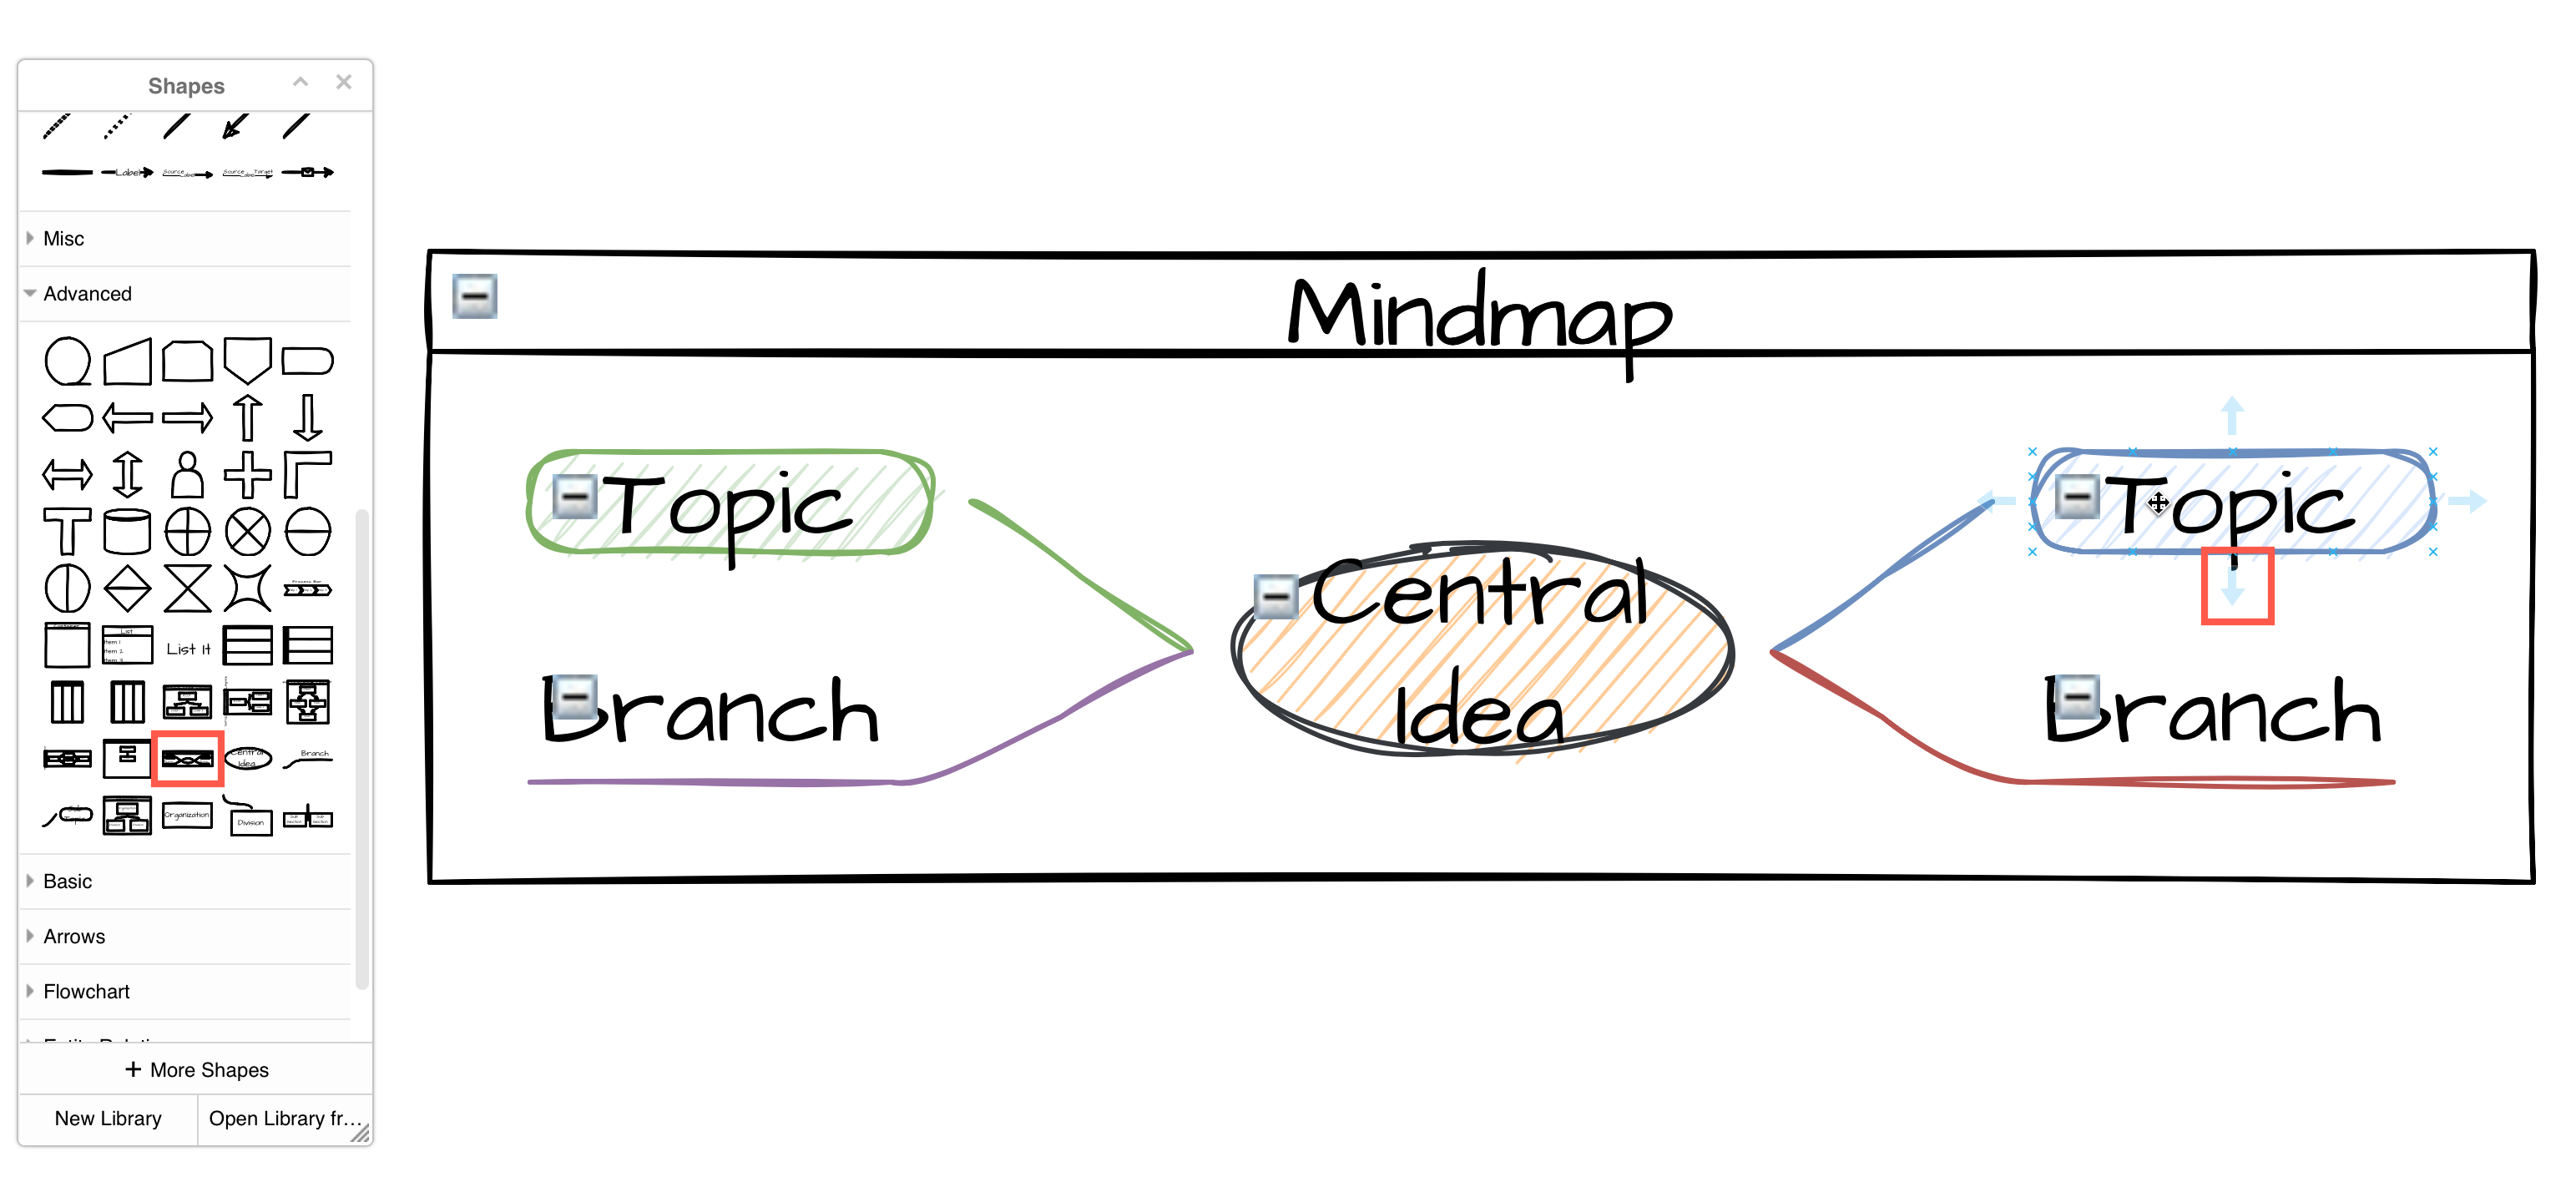 Use the Advanced shapes in the shape library to create an online whiteboard mindmap with draw.io in Confluence